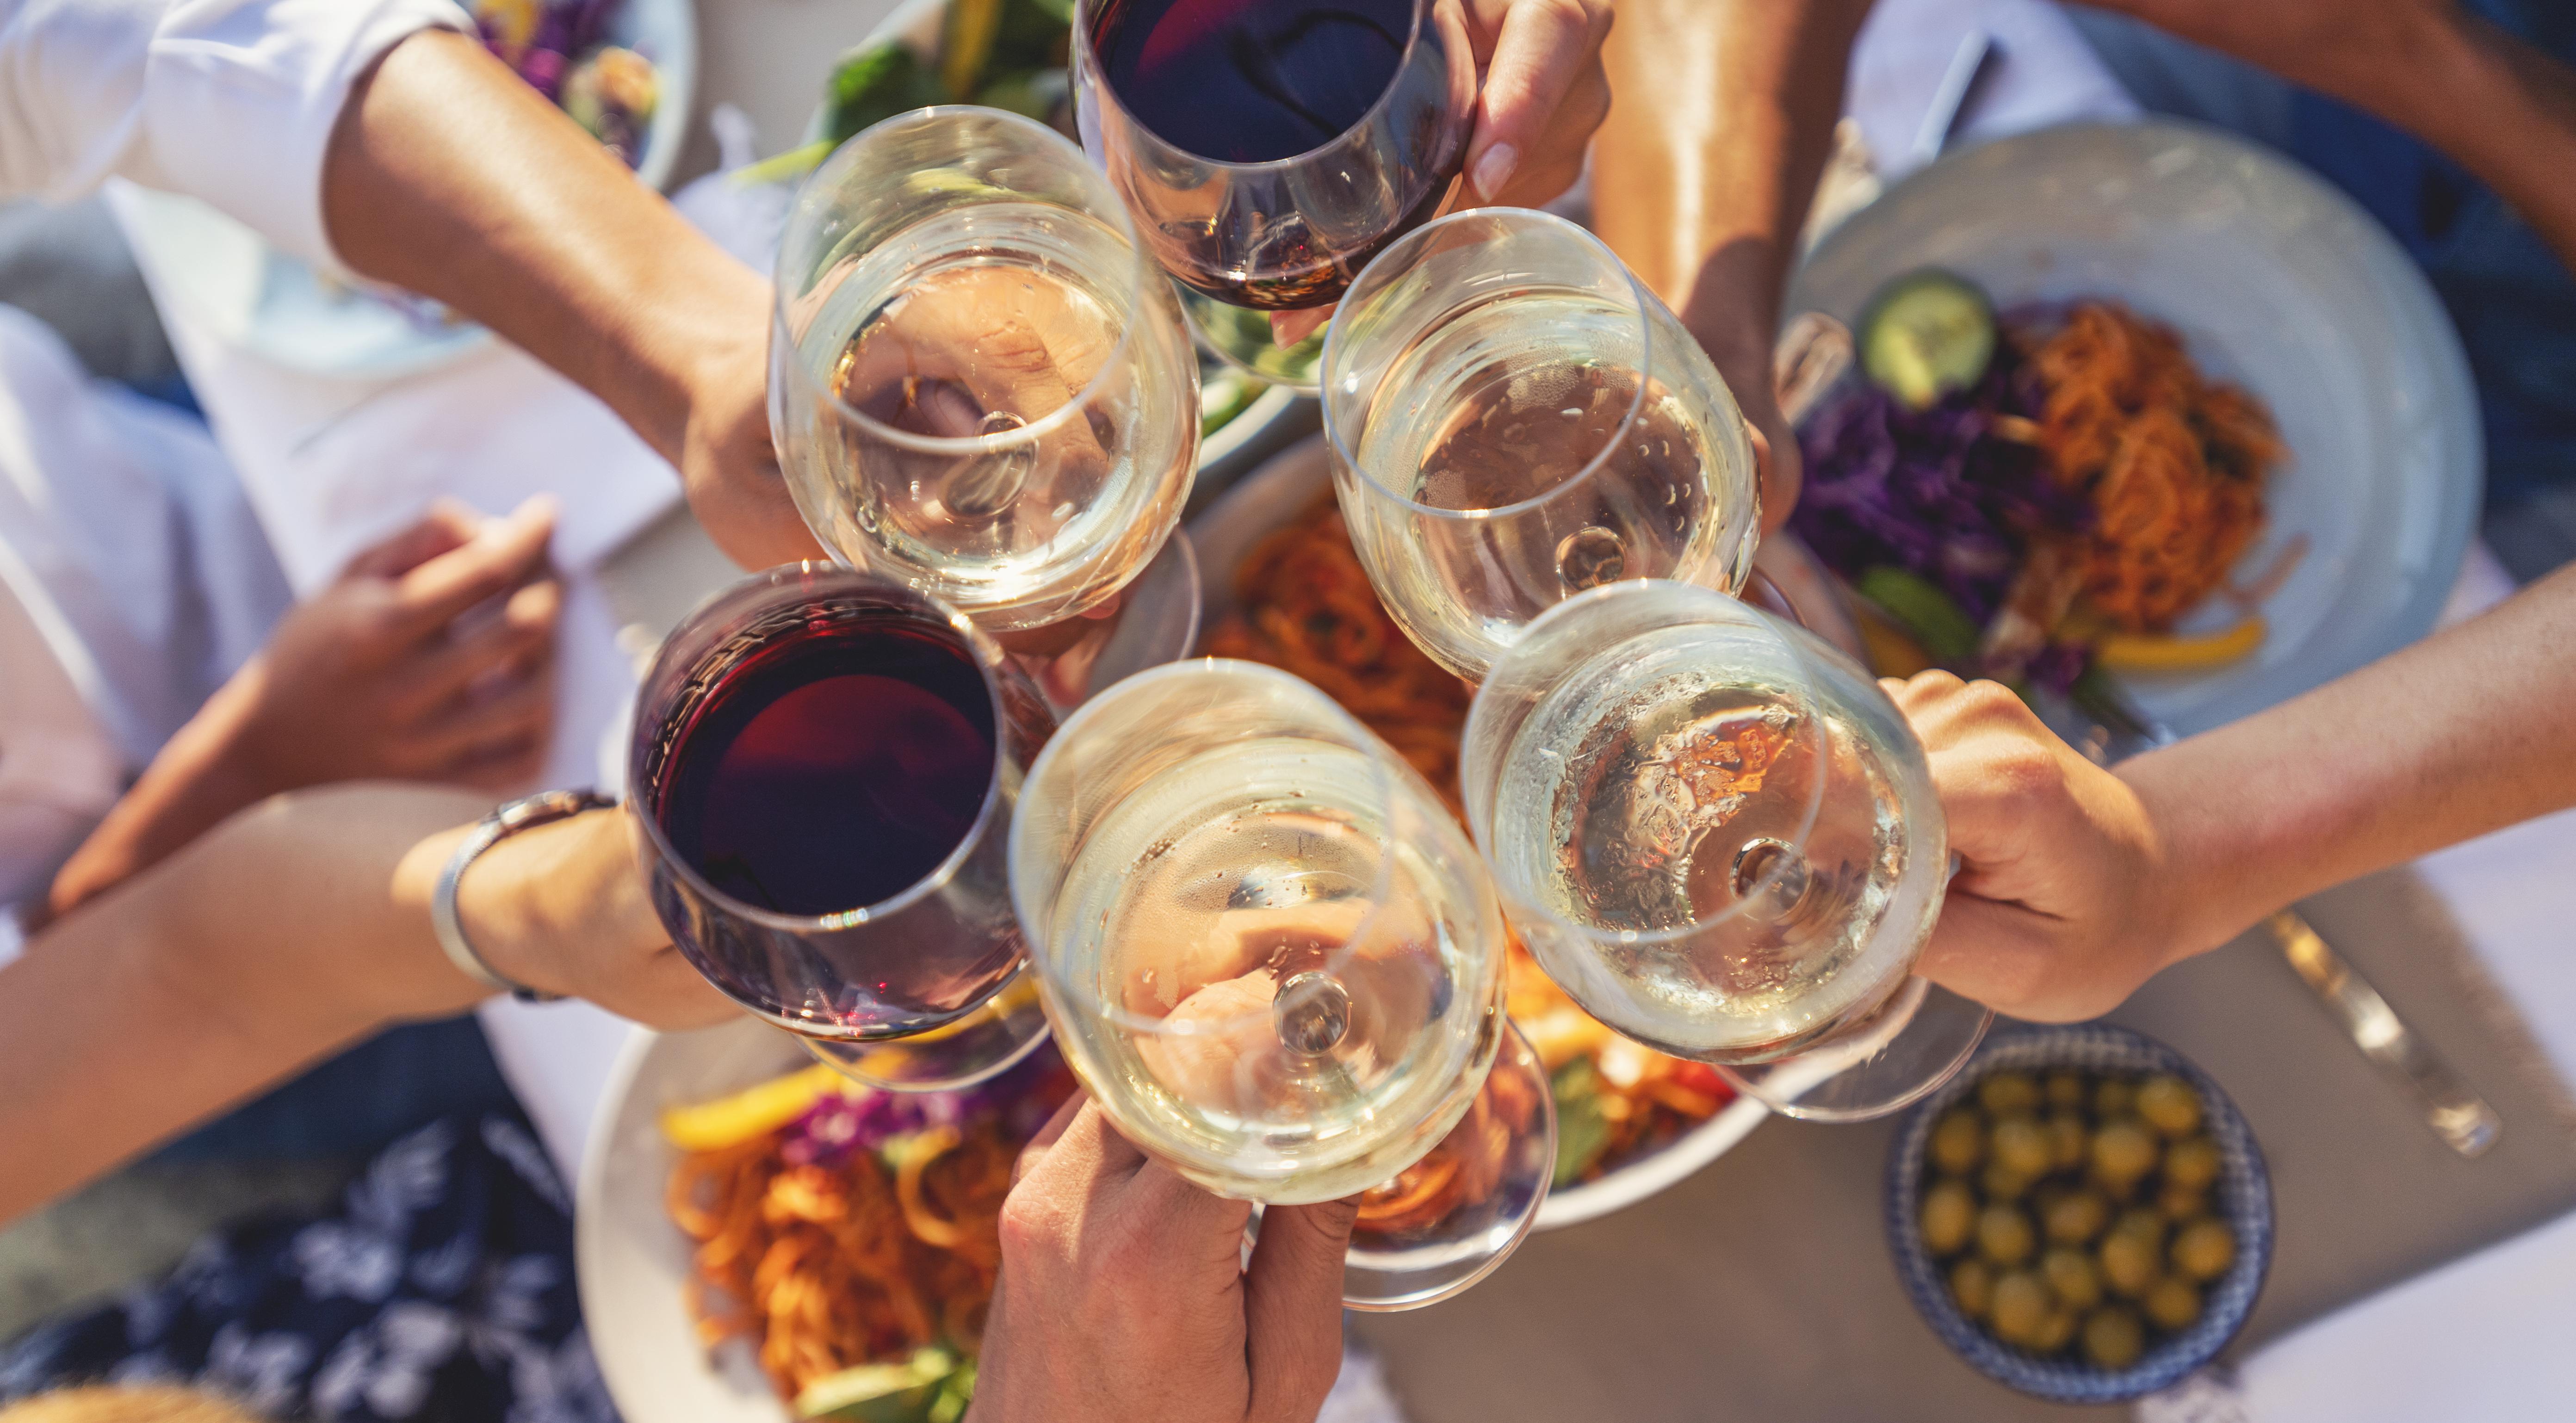 Group of friends having a meal outdoors. They are celebrating with a toast using wine.